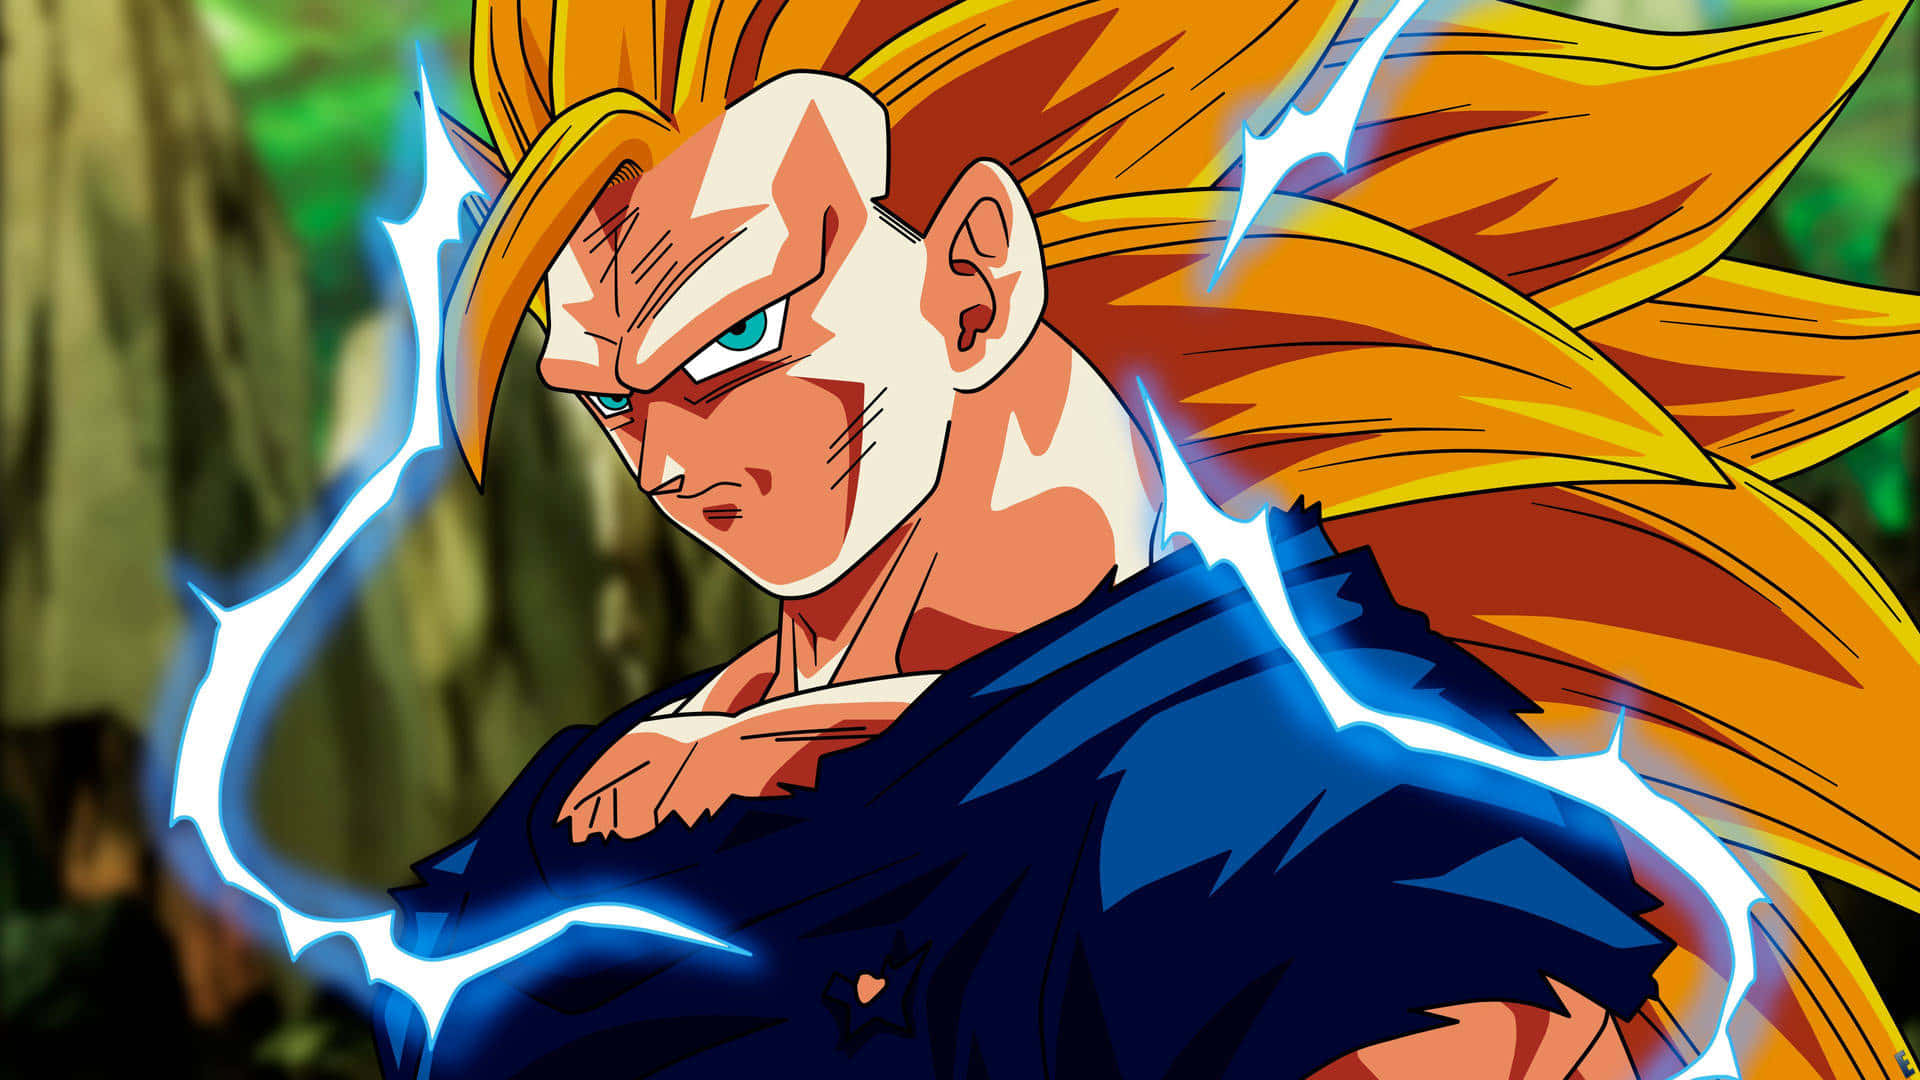 "SSJ3: Take Your Power To The Next Level" Wallpaper